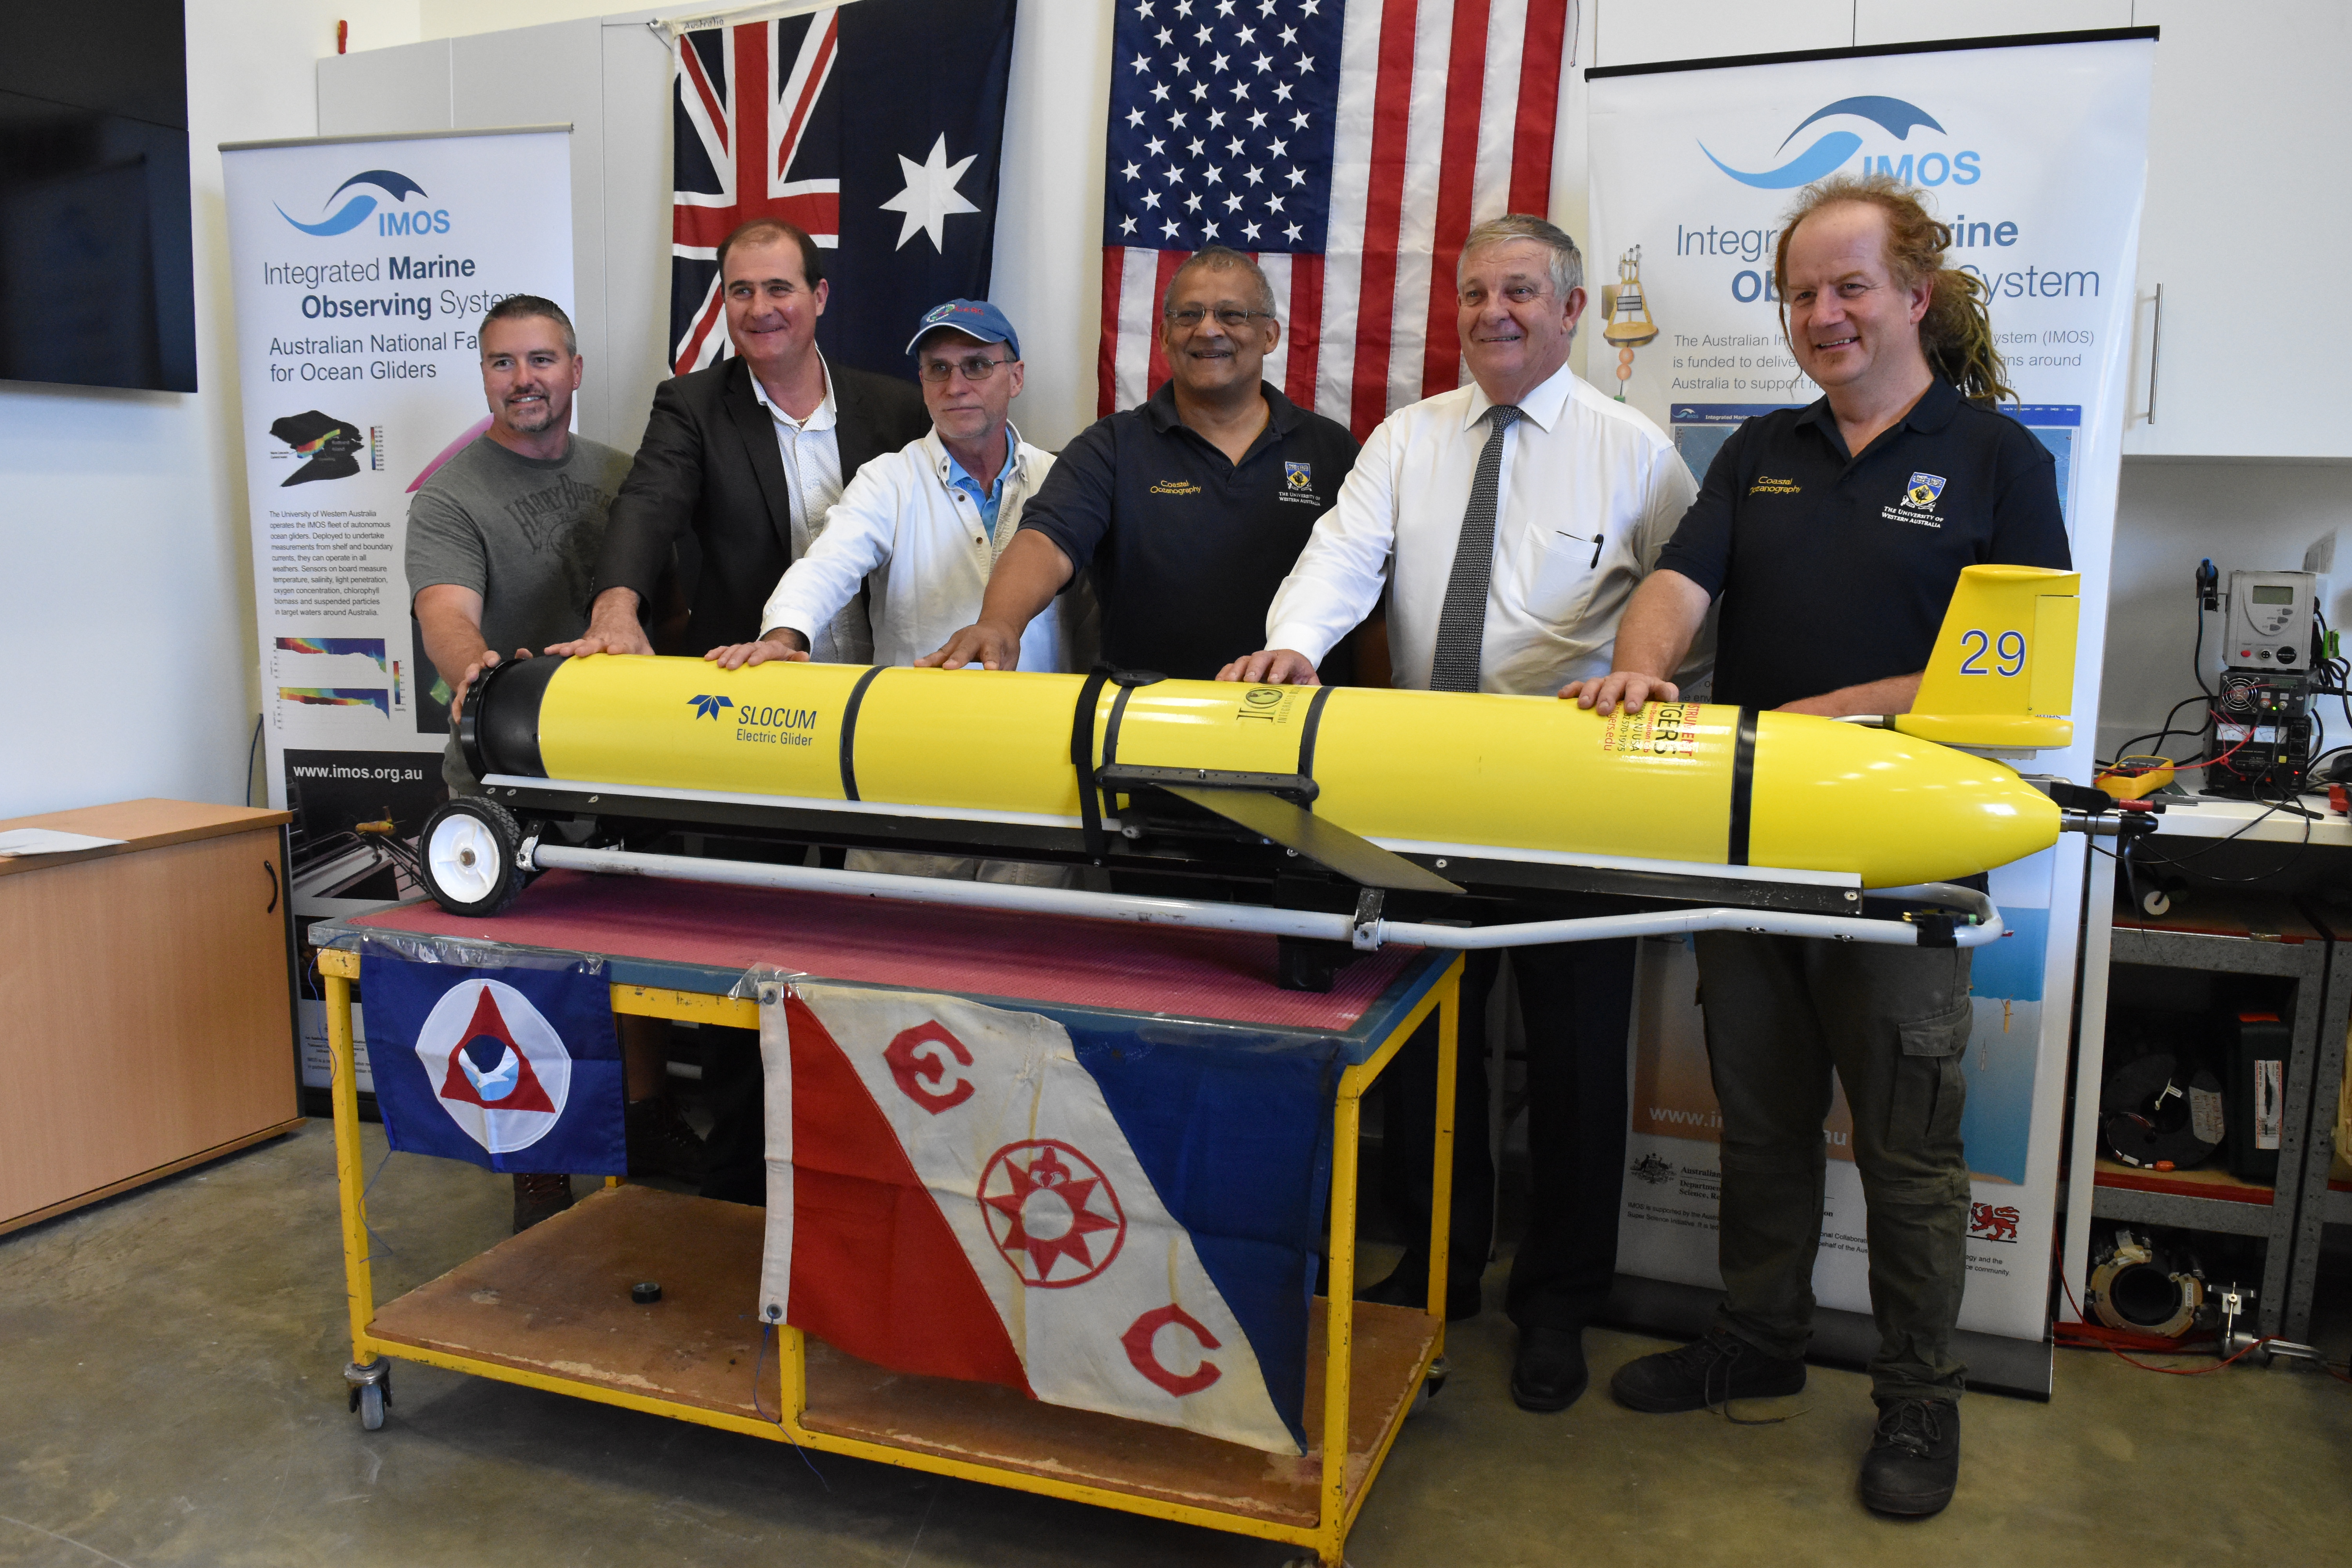 Glider RU29 is re-christened Challenger with Indian Ocean water at the University of Western Australia glider port in Perth, Australia.

L to R: Chip Haldeman, Rutgers glider pilot; Nick D’Adamo, Head – Perth Programme Office of the Intergovernmental Oceanographic Commission (IOC) of UNESCO and IOC IIOE-2 Coordinator; Scott Glenn, Rutgers Professor; Charitha Pattiaratchi, University of Western Australia Professor; Dr. Christopher Back, Liberal Senator for Western Australia and Chair, Senate Foreign Affairs, Defense & Trade Legislation Committee; and Dennis Stanley, UWA Glider Pilot.  On board the glider are flags from participating nations, including the United States, Australia, Sri Lanka, Indonesia, India, Spain, Germany, Brazil and South Africa, plus a challenge coin from NOAA Administrator, Dr. Kathryn Sullivan.